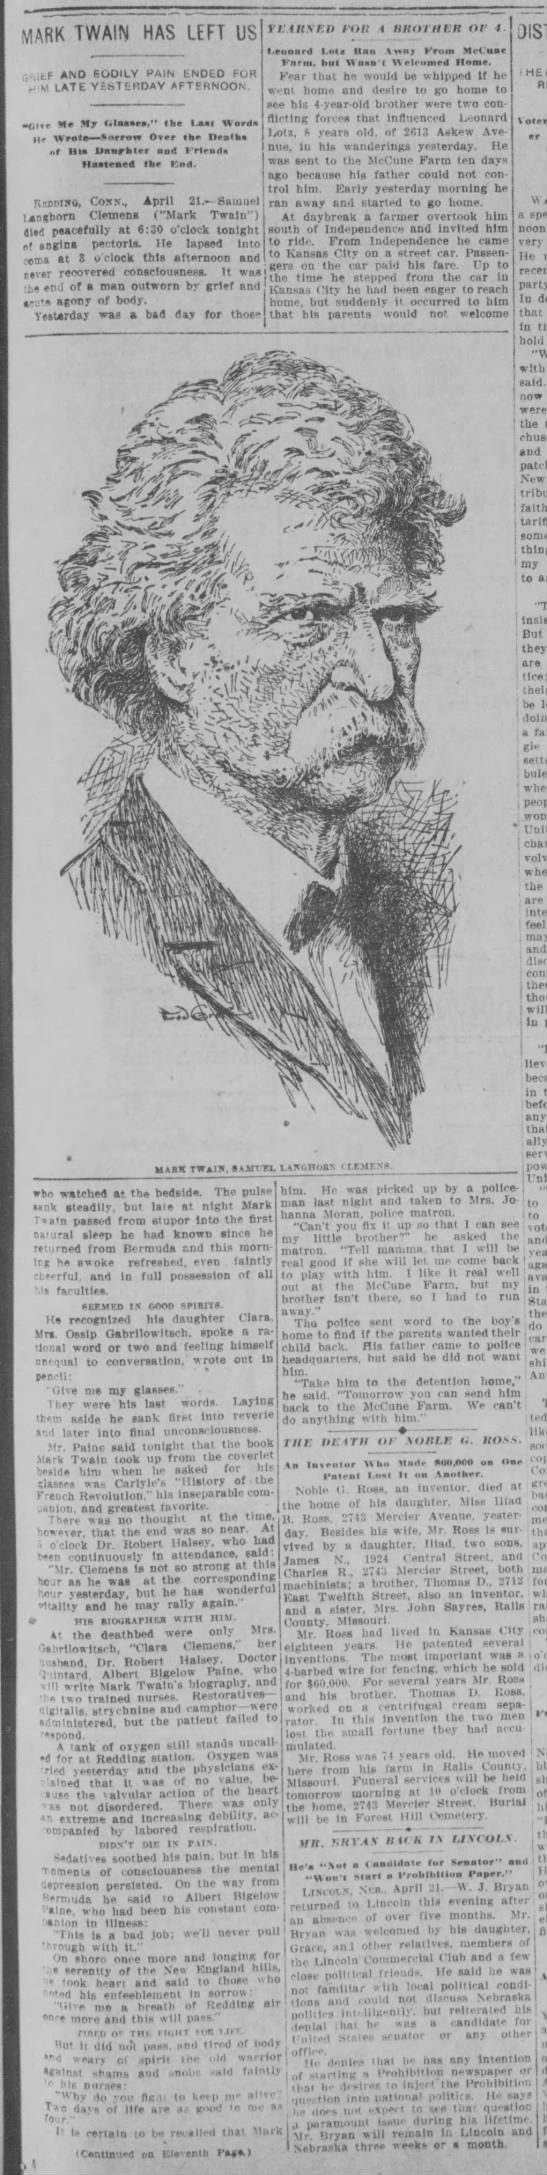 Newspaper reports on Samuel Clemens's death; includes image of Mark Twain - 